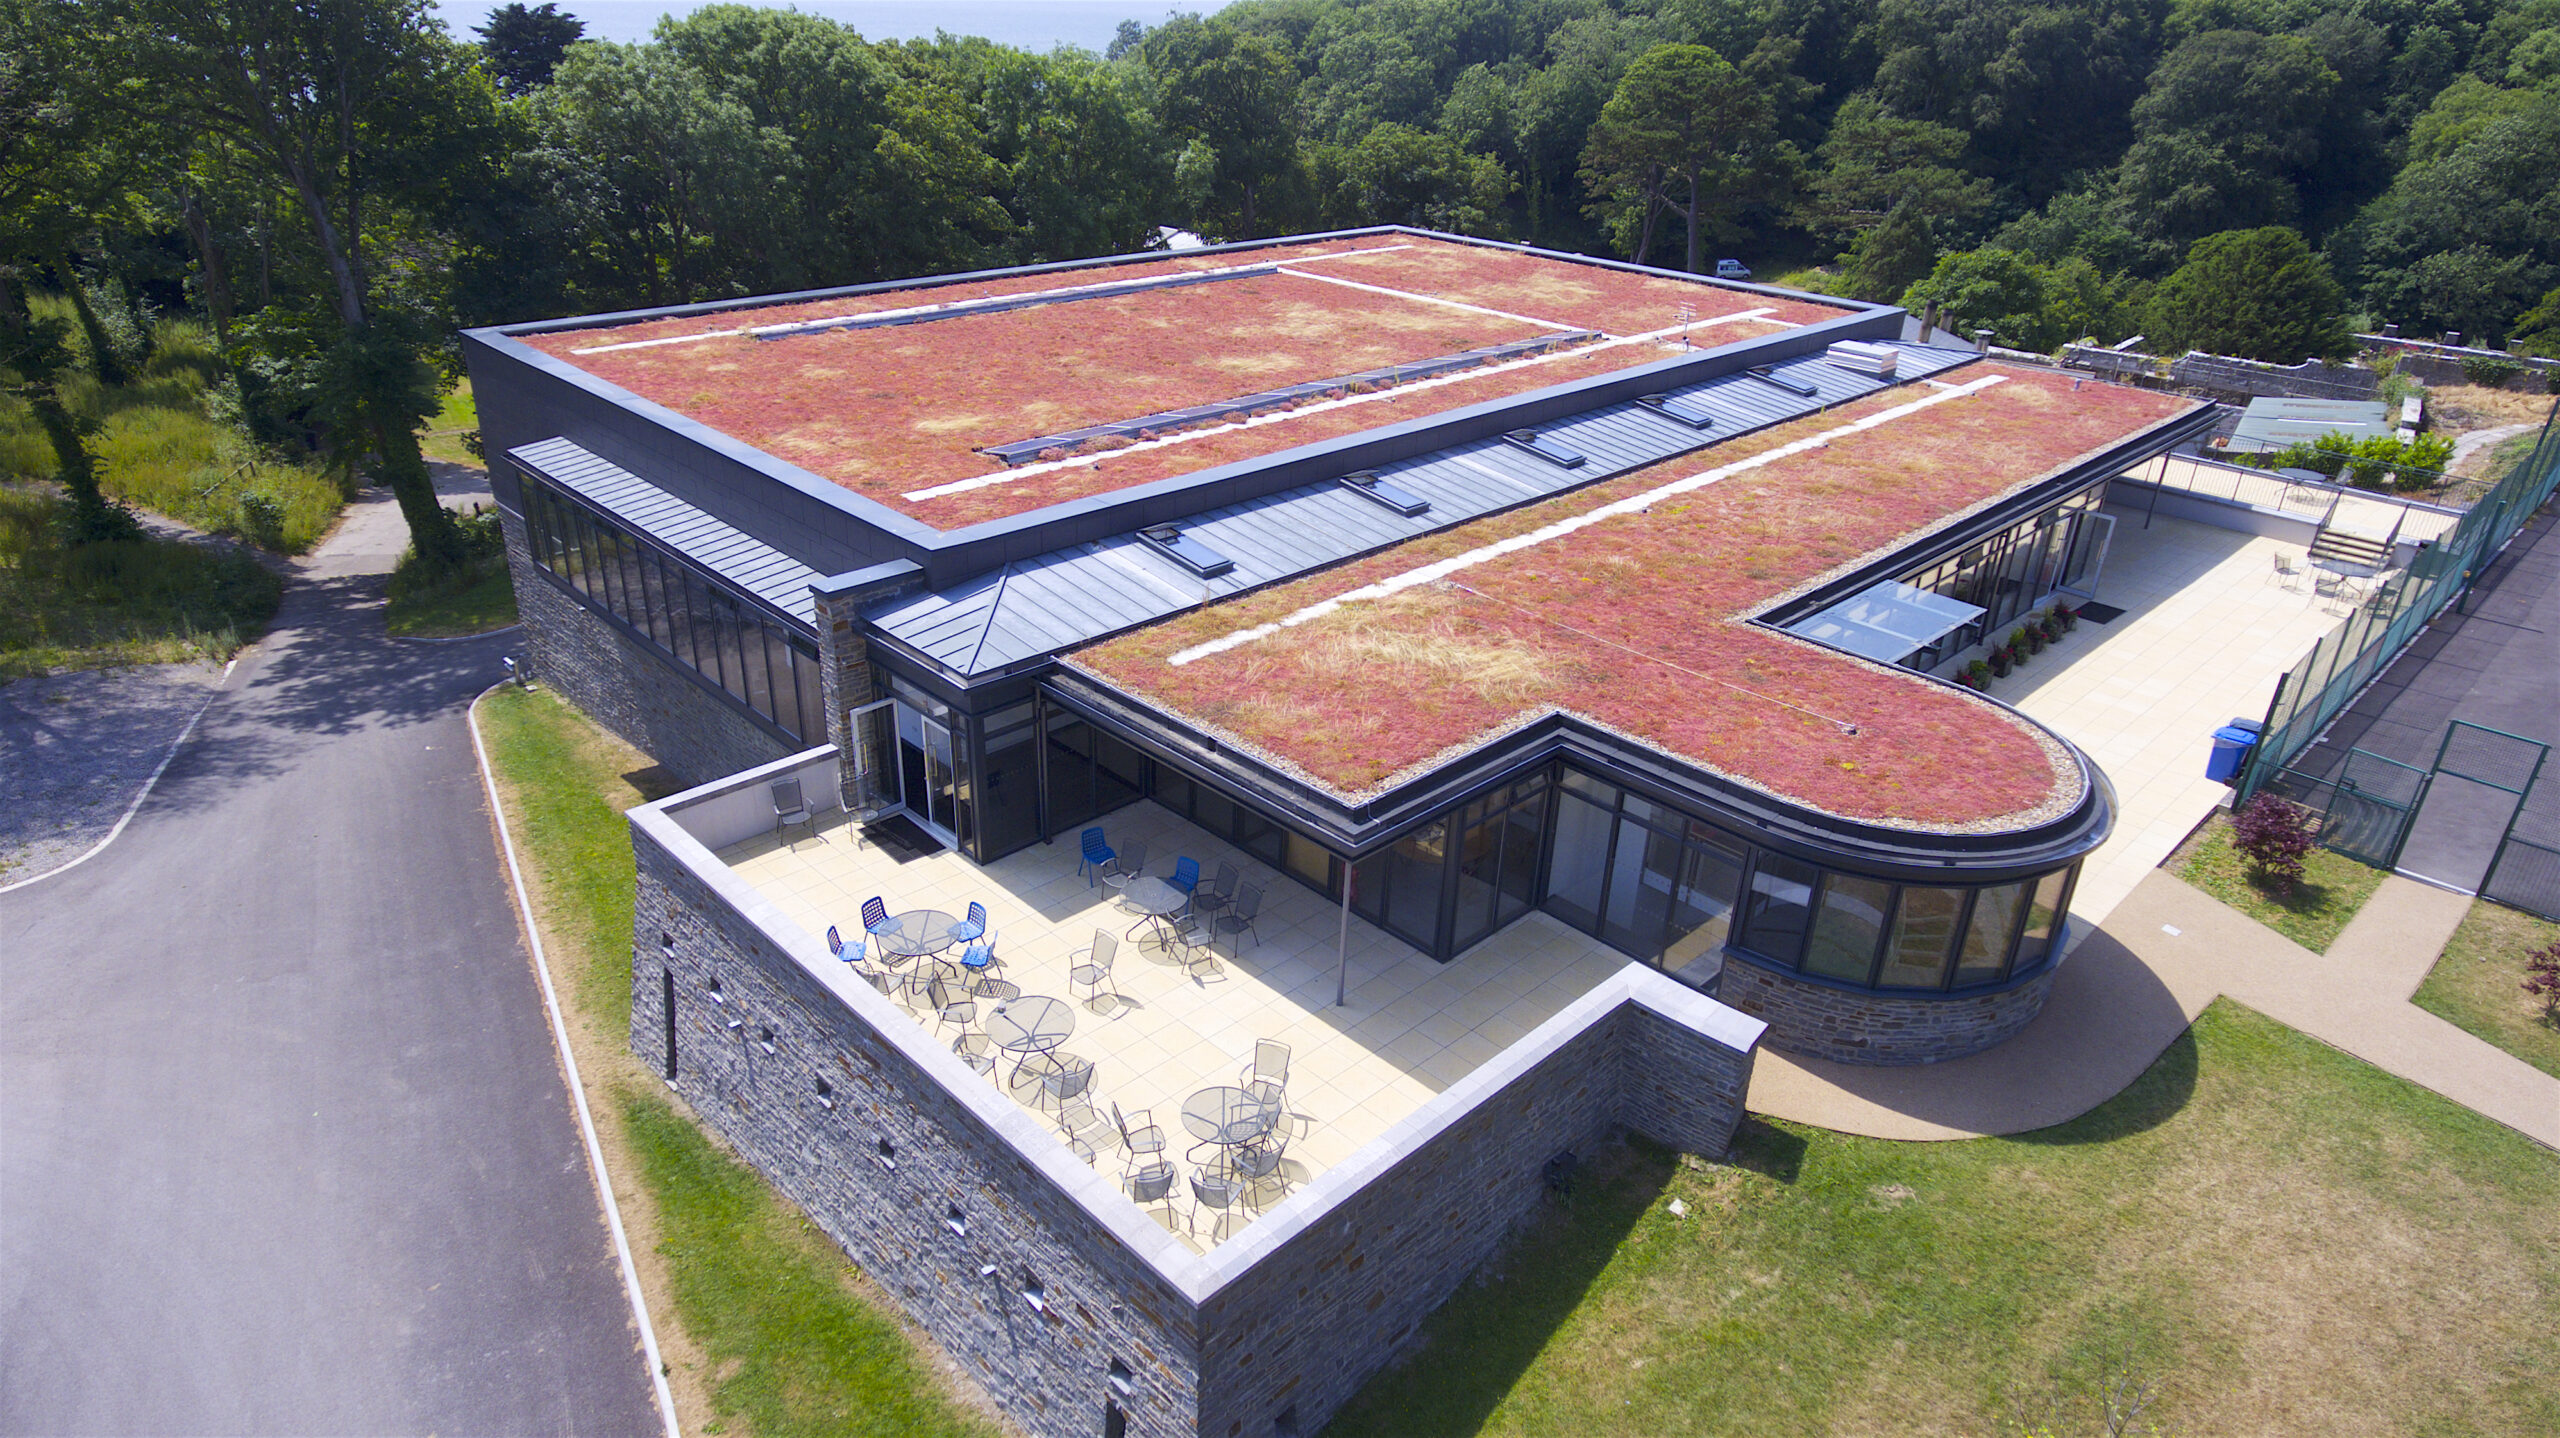 Sky is the limit for specialist commercial roofers following MBO